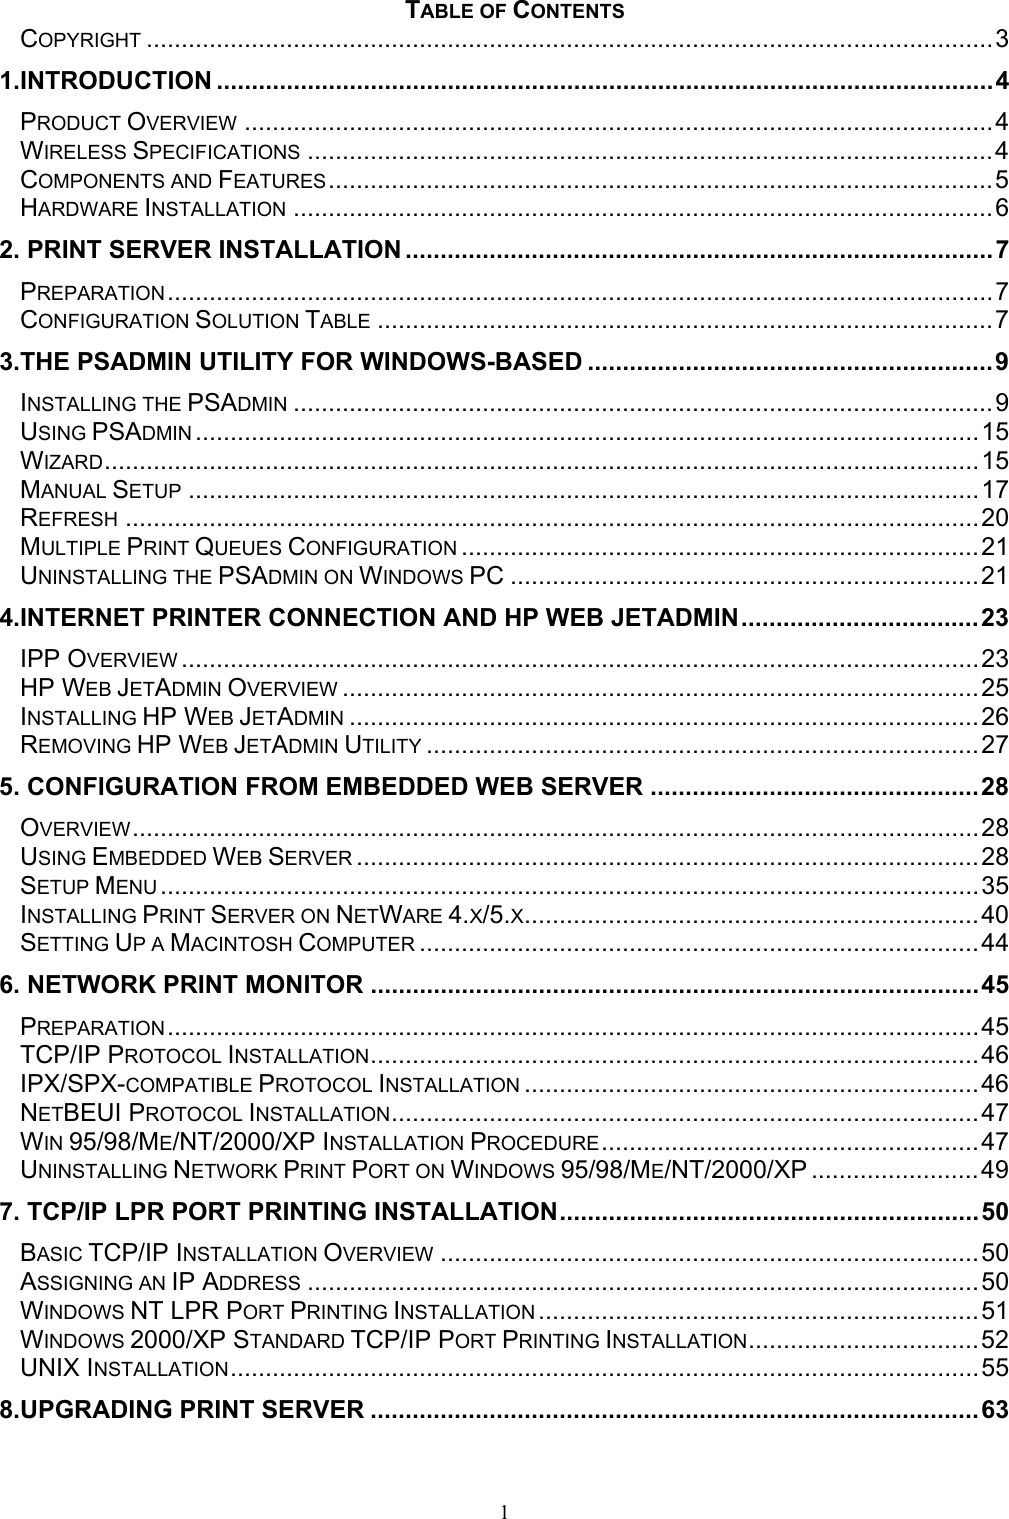 1 TABLE OF CONTENTS COPYRIGHT .........................................................................................................................3 1.INTRODUCTION ...............................................................................................................4 PRODUCT OVERVIEW ...........................................................................................................4 WIRELESS SPECIFICATIONS ..................................................................................................4 COMPONENTS AND FEATURES...............................................................................................5 HARDWARE INSTALLATION ....................................................................................................6 2. PRINT SERVER INSTALLATION ....................................................................................7 PREPARATION......................................................................................................................7 CONFIGURATION SOLUTION TABLE ........................................................................................7 3.THE PSADMIN UTILITY FOR WINDOWS-BASED ..........................................................9 INSTALLING THE PSADMIN ....................................................................................................9 USING PSADMIN ................................................................................................................15 WIZARD.............................................................................................................................15 MANUAL SETUP .................................................................................................................17 REFRESH ..........................................................................................................................20 MULTIPLE PRINT QUEUES CONFIGURATION ..........................................................................21 UNINSTALLING THE PSADMIN ON WINDOWS PC ...................................................................21 4.INTERNET PRINTER CONNECTION AND HP WEB JETADMIN..................................23 IPP OVERVIEW ..................................................................................................................23 HP WEB JETADMIN OVERVIEW ...........................................................................................25 INSTALLING HP WEB JETADMIN ..........................................................................................26 REMOVING HP WEB JETADMIN UTILITY ...............................................................................27 5. CONFIGURATION FROM EMBEDDED WEB SERVER ...............................................28 OVERVIEW.........................................................................................................................28 USING EMBEDDED WEB SERVER .........................................................................................28 SETUP MENU .....................................................................................................................35 INSTALLING PRINT SERVER ON NETWARE 4.X/5.X.................................................................40 SETTING UP A MACINTOSH COMPUTER ................................................................................44 6. NETWORK PRINT MONITOR .......................................................................................45 PREPARATION....................................................................................................................45 TCP/IP PROTOCOL INSTALLATION.......................................................................................46 IPX/SPX-COMPATIBLE PROTOCOL INSTALLATION .................................................................46 NETBEUI PROTOCOL INSTALLATION....................................................................................47 WIN 95/98/ME/NT/2000/XP INSTALLATION PROCEDURE......................................................47 UNINSTALLING NETWORK PRINT PORT ON WINDOWS 95/98/ME/NT/2000/XP ........................49 7. TCP/IP LPR PORT PRINTING INSTALLATION............................................................50 BASIC TCP/IP INSTALLATION OVERVIEW .............................................................................50 ASSIGNING AN IP ADDRESS ................................................................................................50 WINDOWS NT LPR PORT PRINTING INSTALLATION ...............................................................51 WINDOWS 2000/XP STANDARD TCP/IP PORT PRINTING INSTALLATION.................................52 UNIX INSTALLATION...........................................................................................................55 8.UPGRADING PRINT SERVER .......................................................................................63 